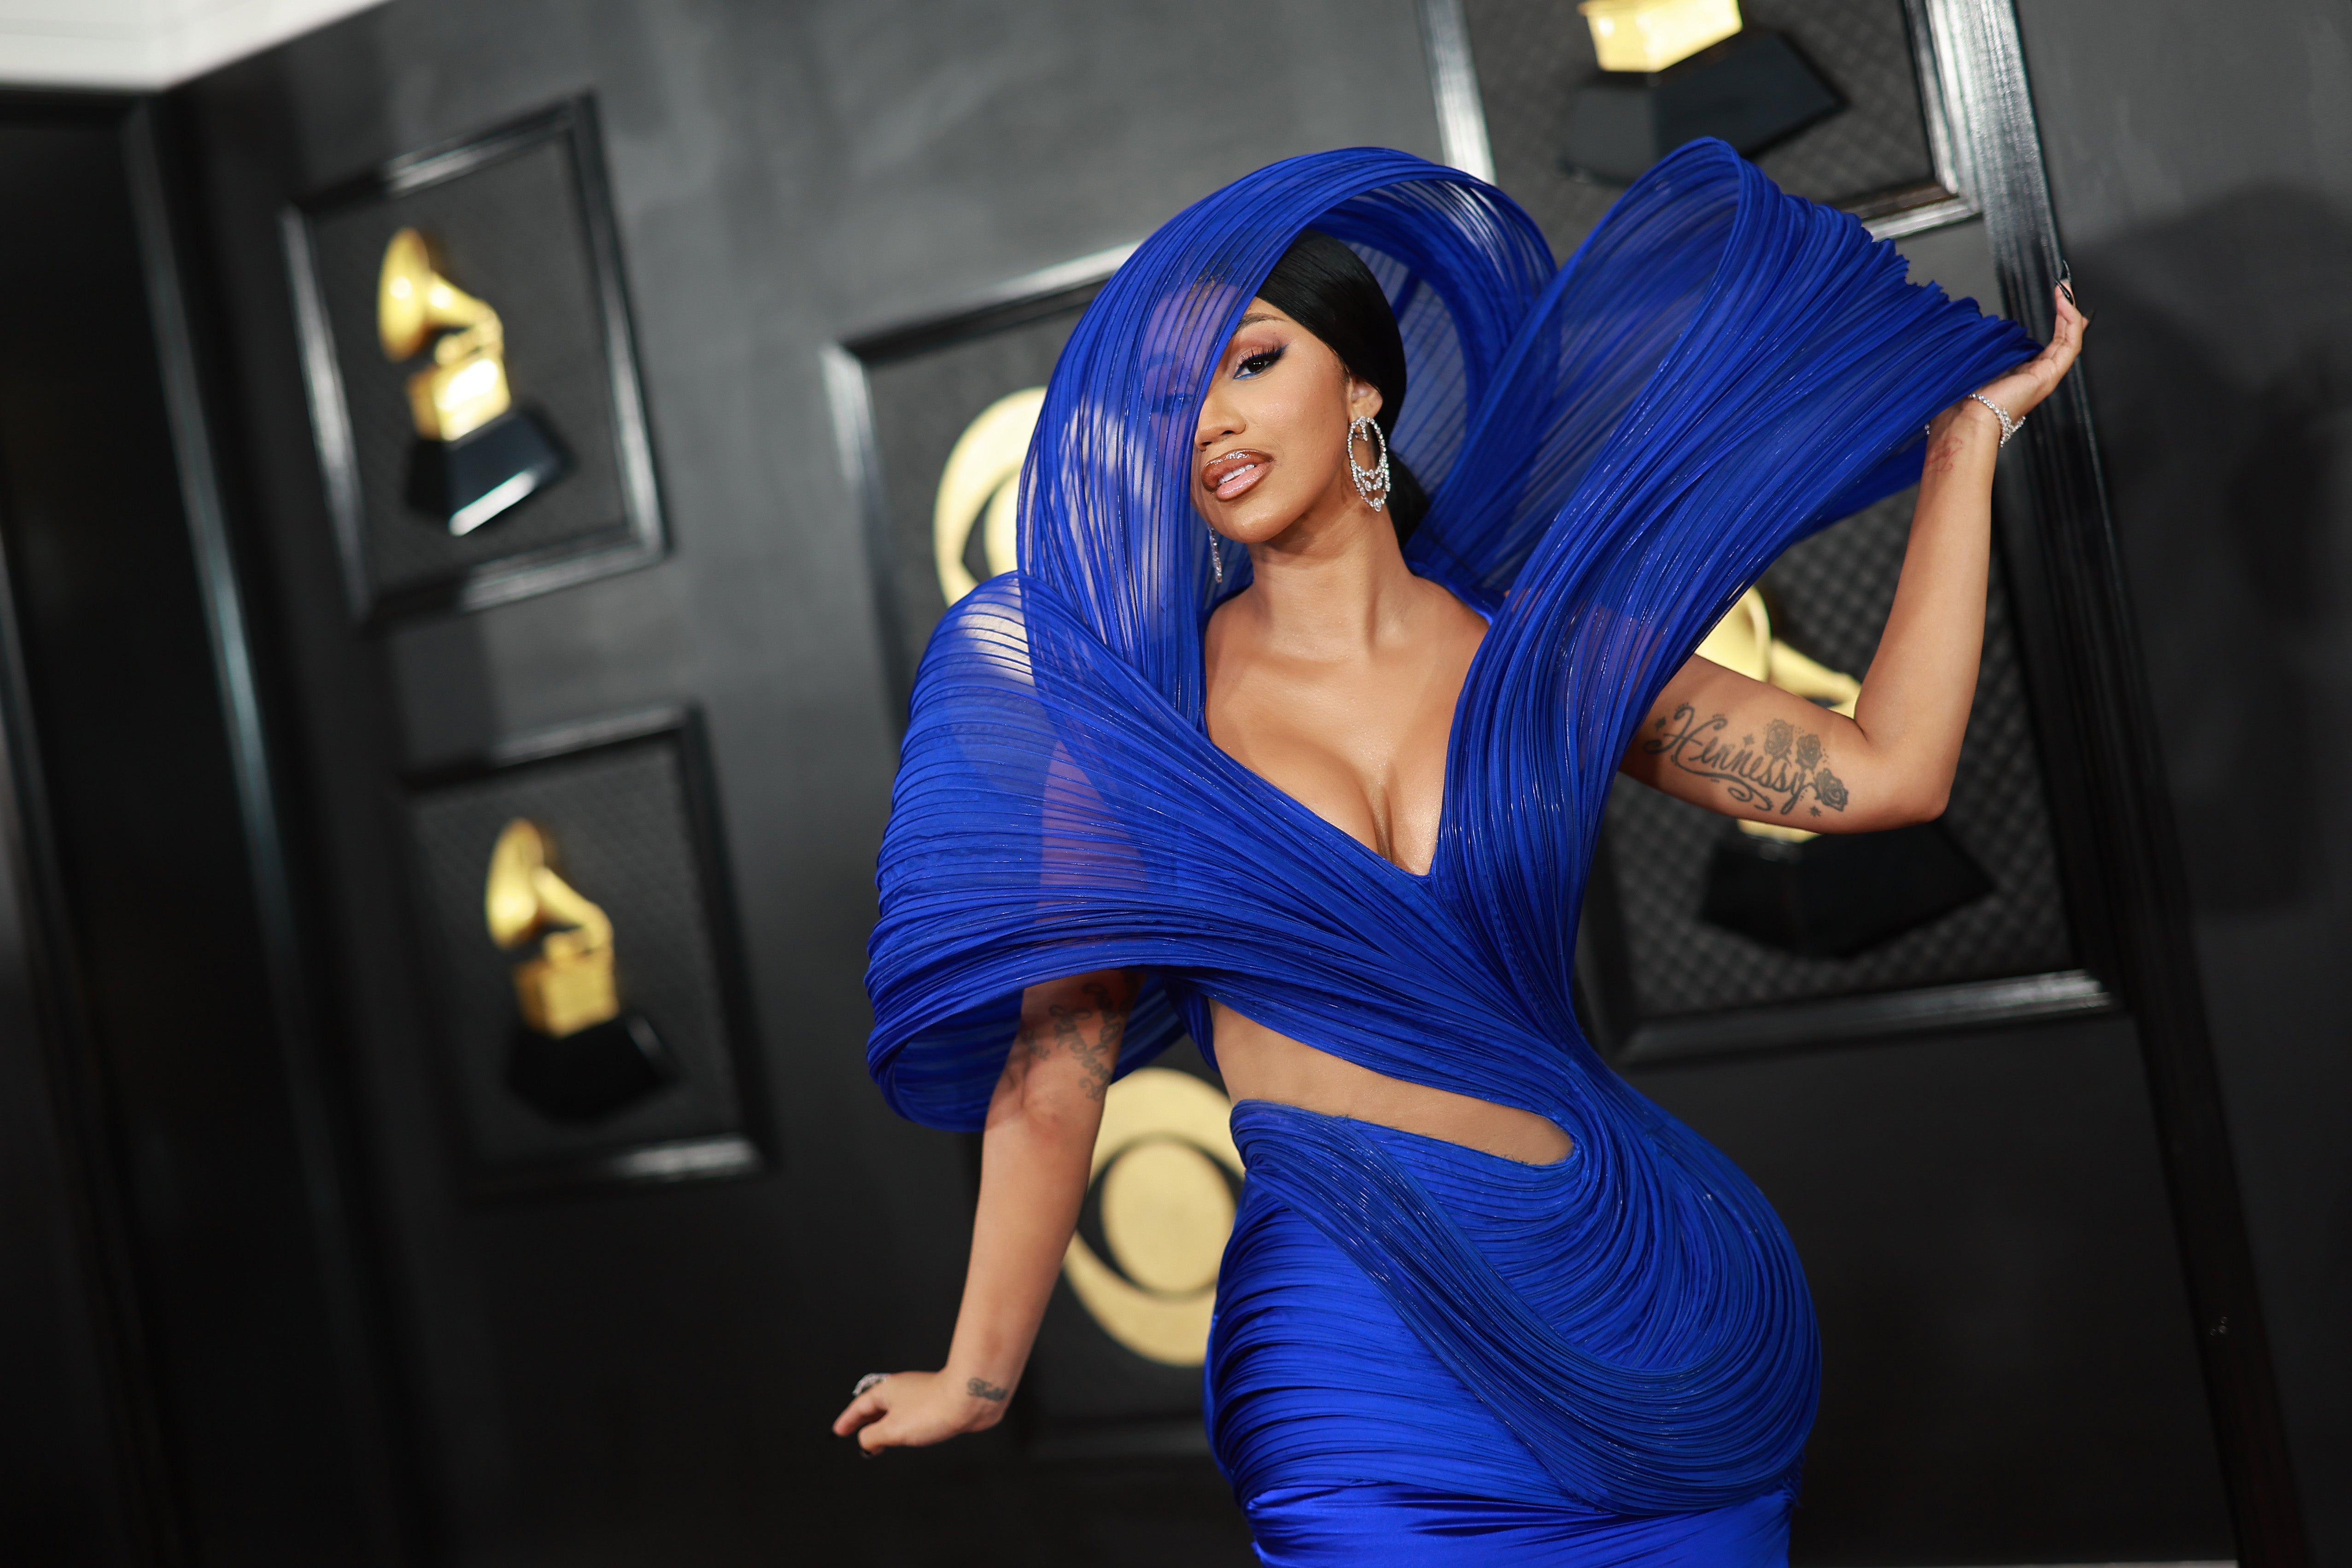 Cardi B Just Showed Off Her 'Wave' Face Tattoo in Honor of Her Son